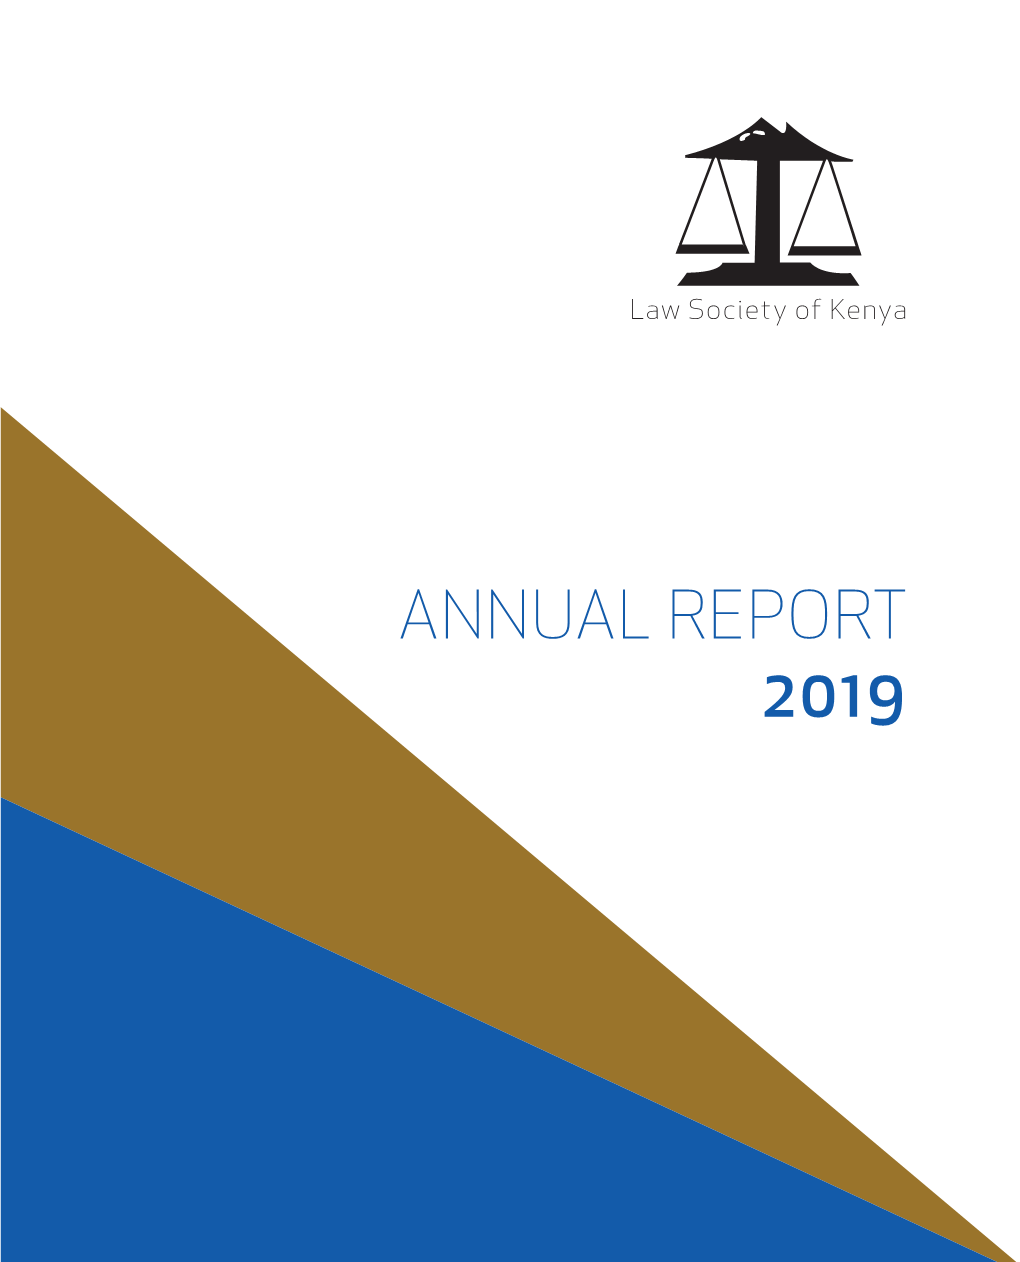 ANNUAL REPORT 2019 Law Society of Kenya